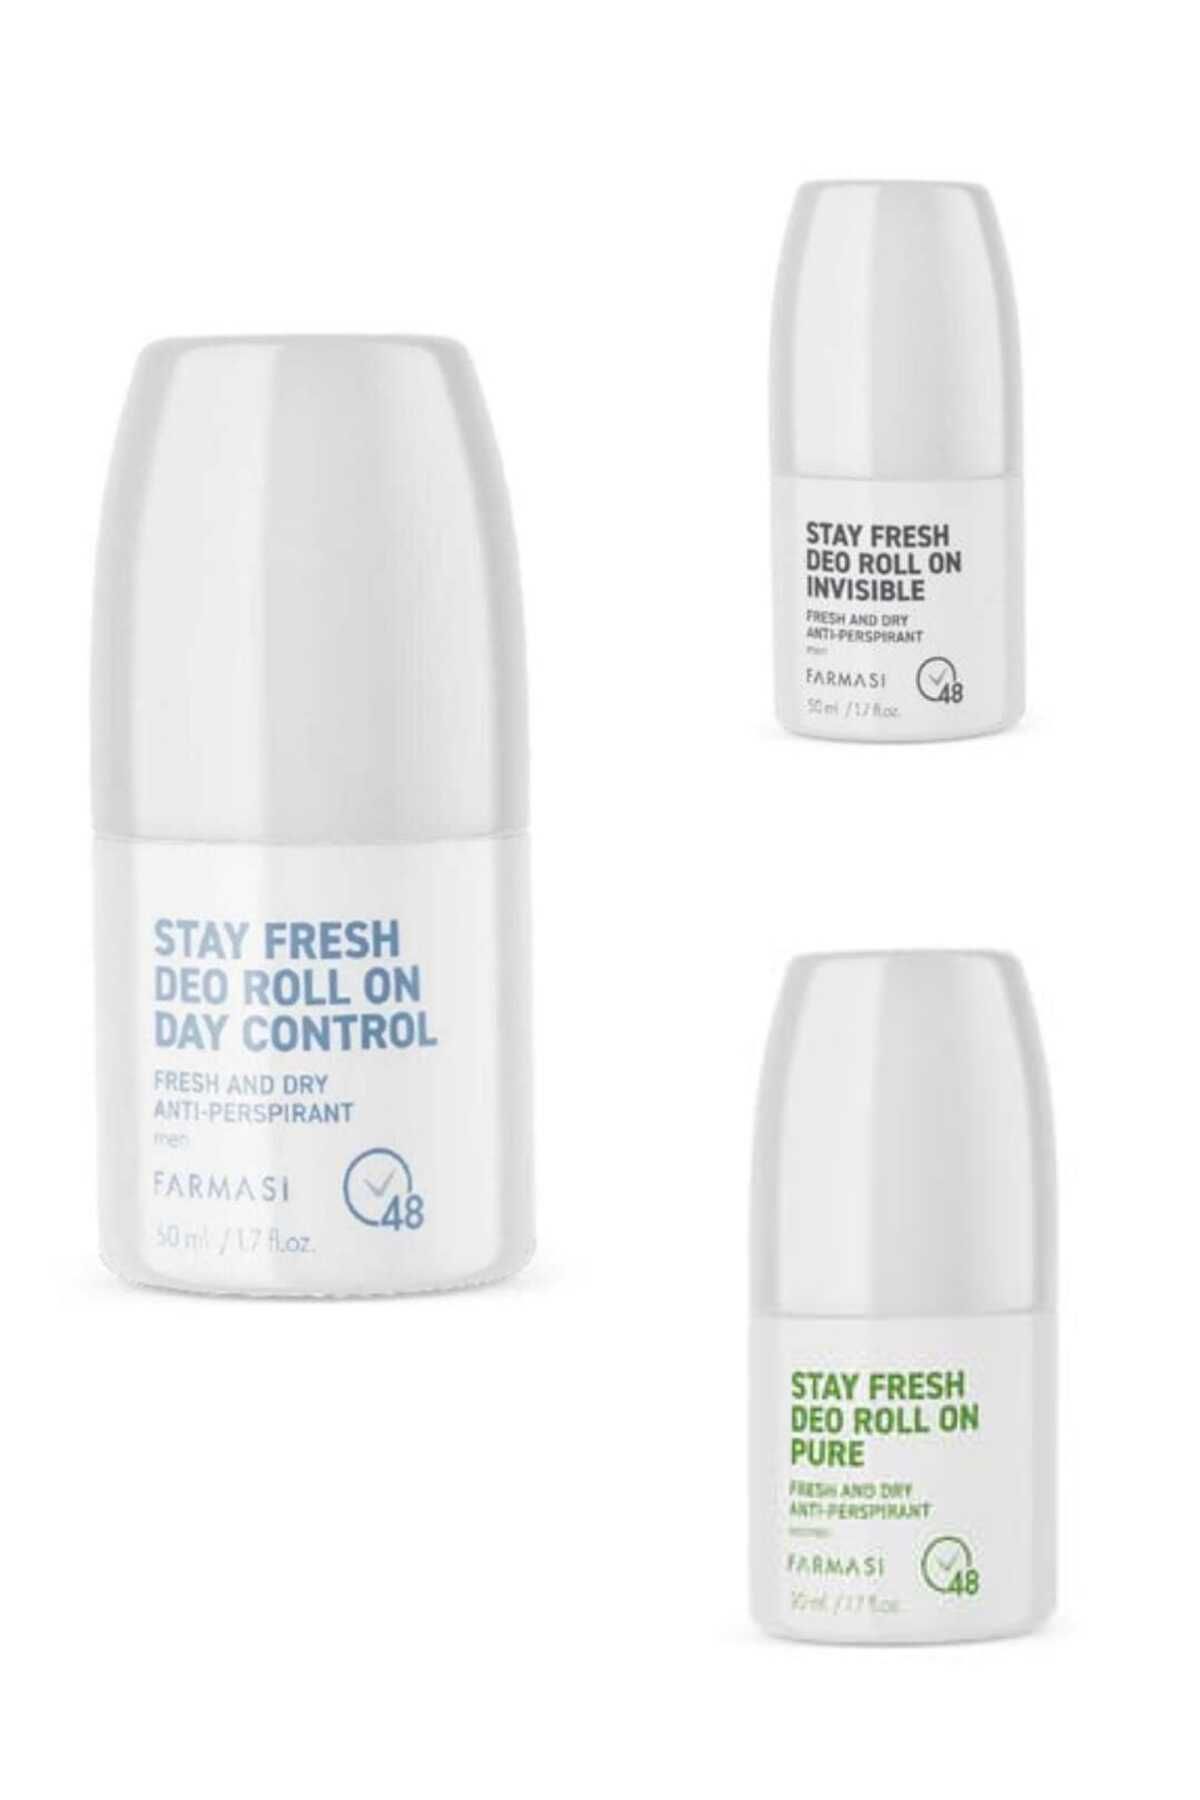 Farmasi Stay Fresh Deo Roll On Day Control 50 ml &Invisible Roll On 50 ml&Pure Roll On 50ML(2 ERKEK 1 BAYAN)